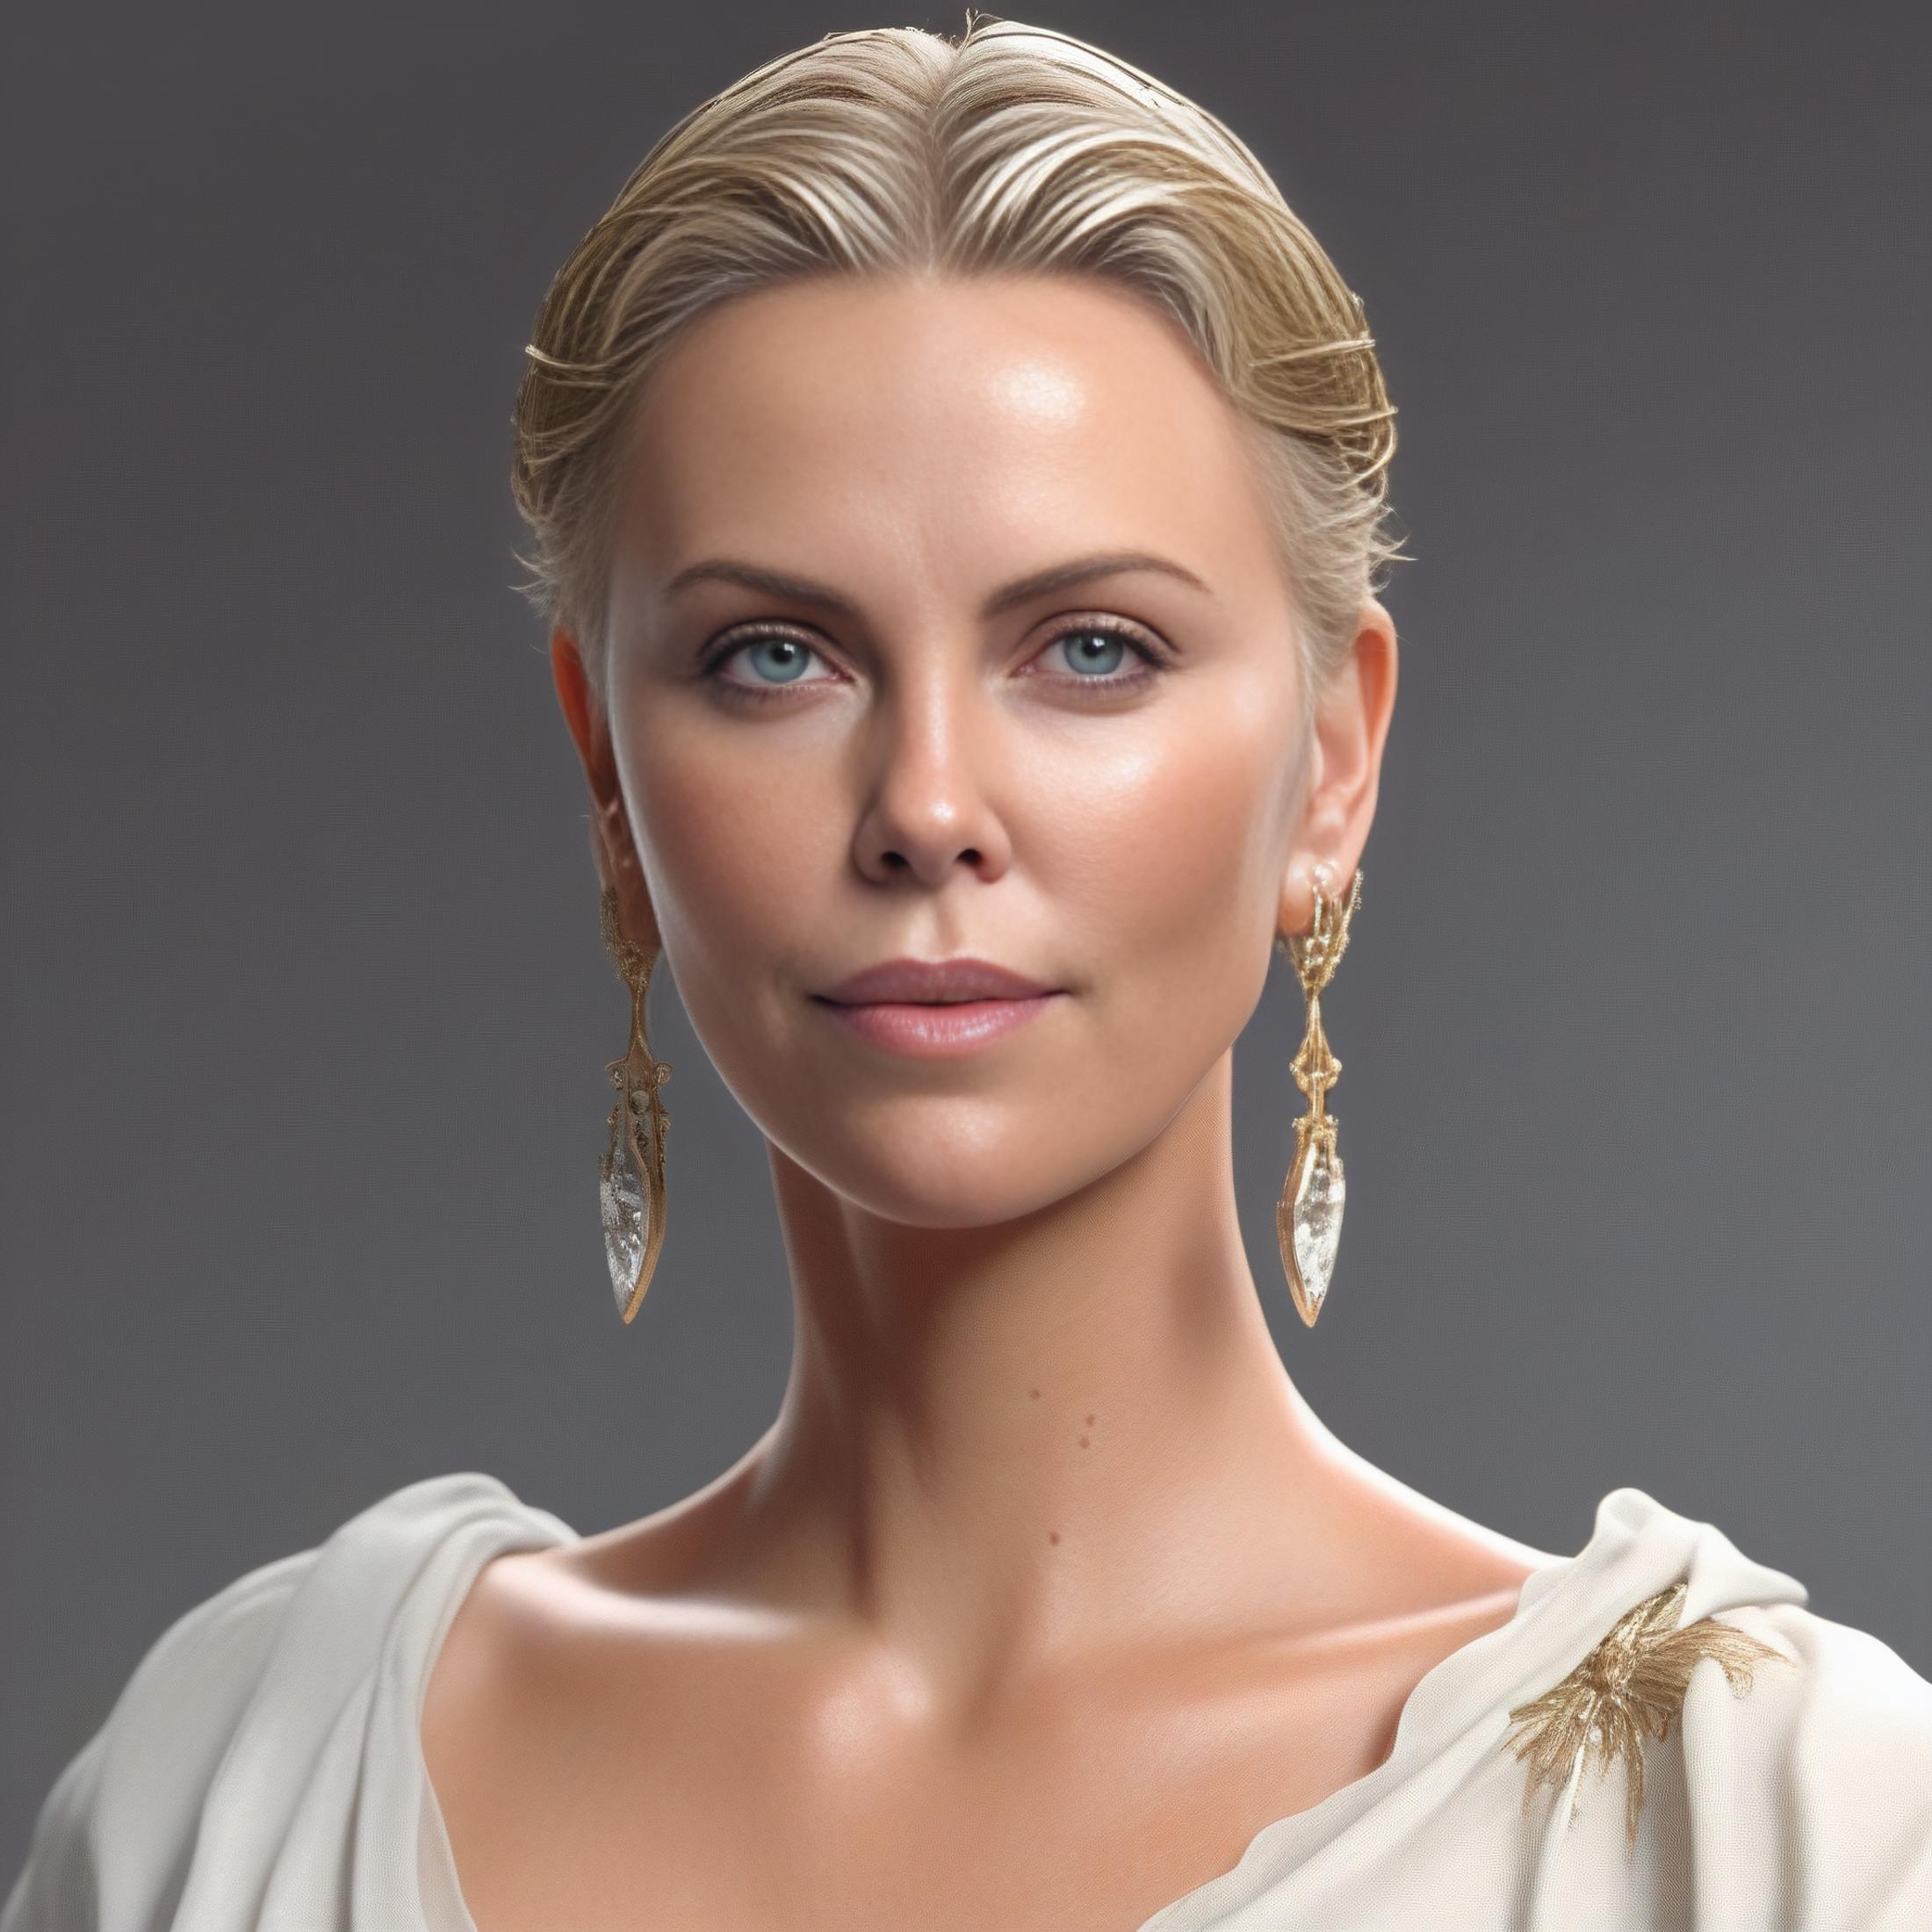 Charlize Theron image by parar20